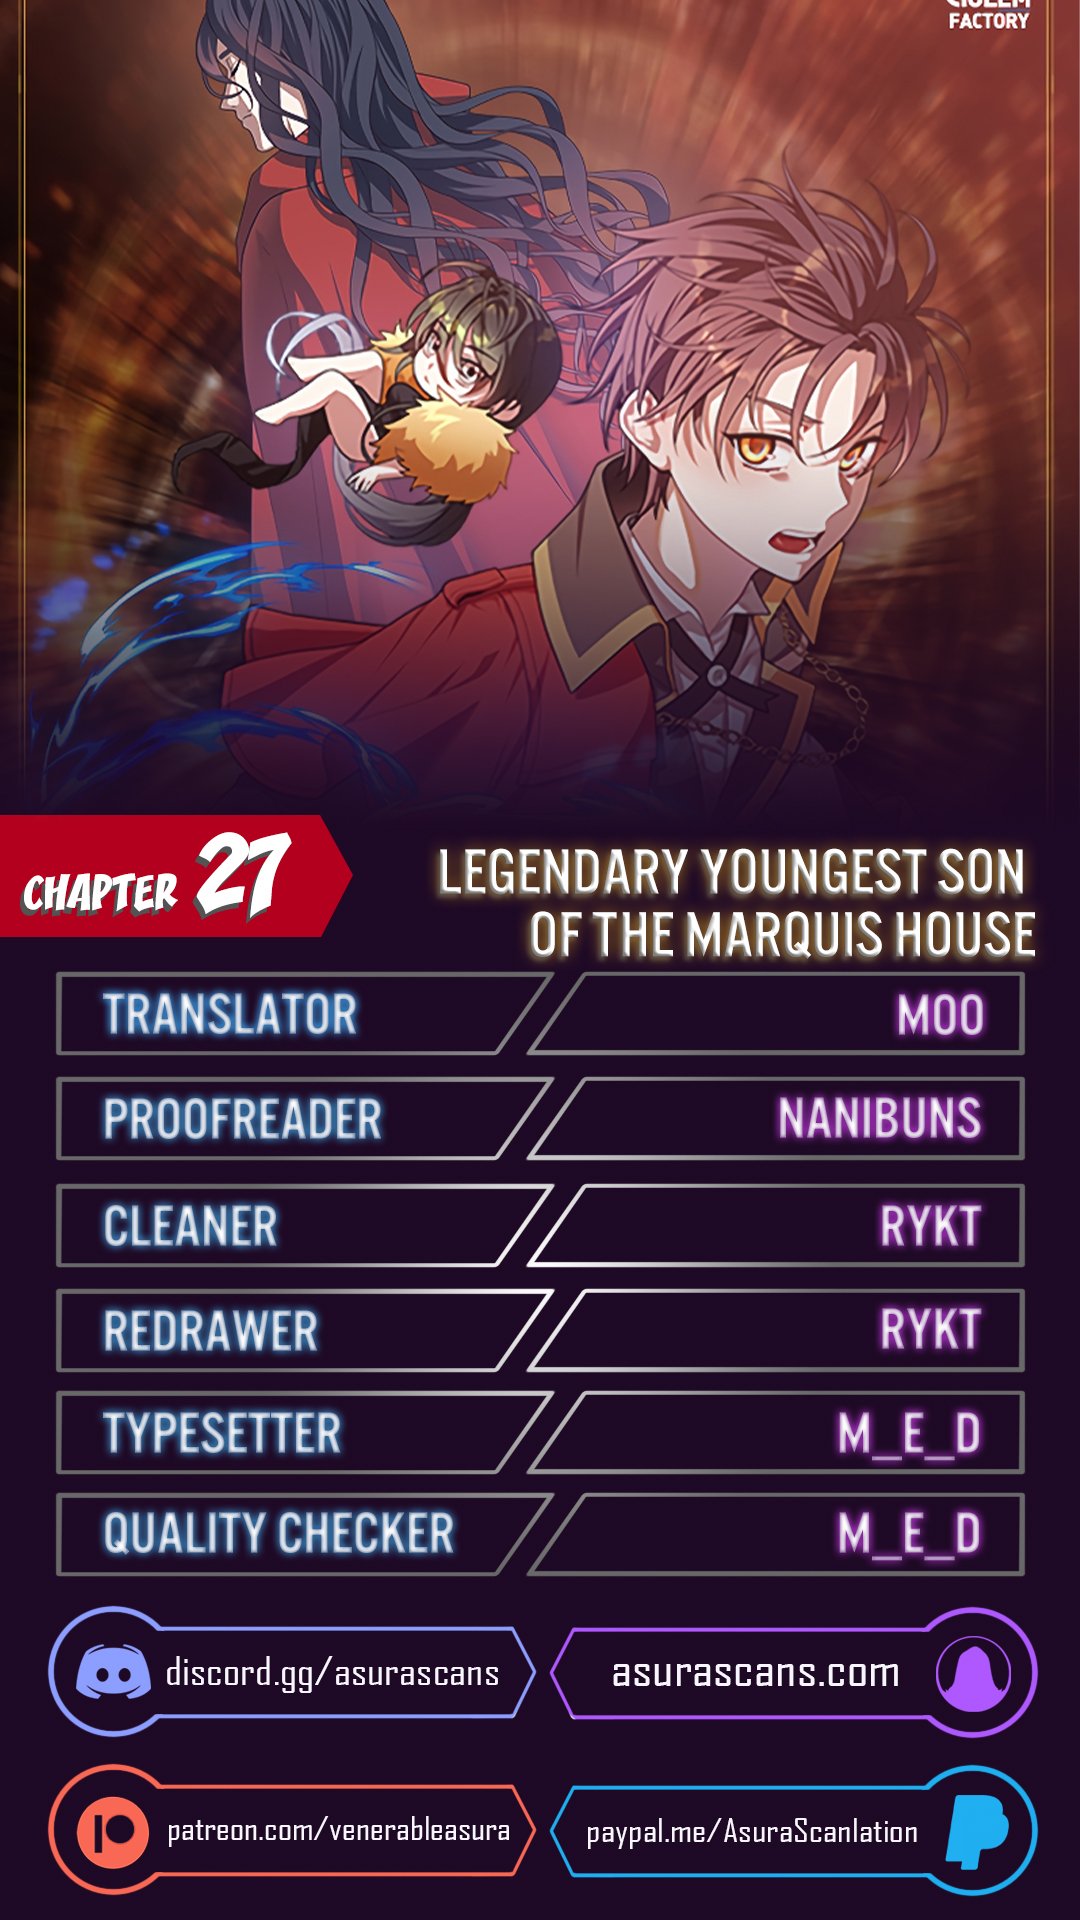 Legendary Youngest Son of the Marquis House - Chapter 18879 - Image 1